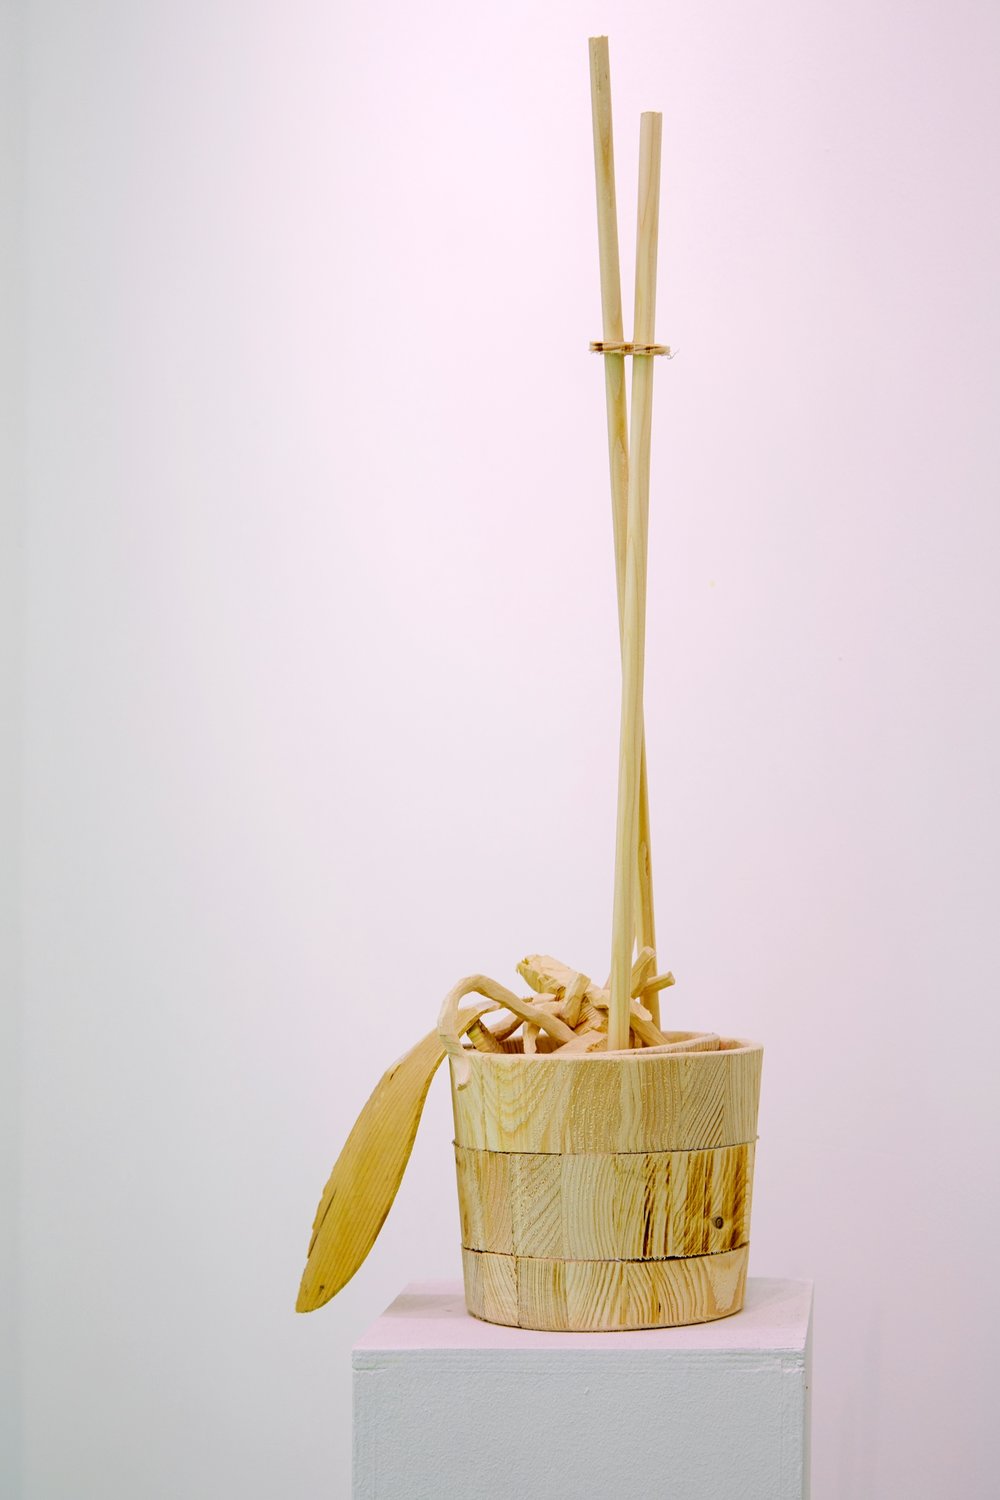 Dead Orchid 2017, wood 60 x 23 x 15 cm ed. of 3, 1/3